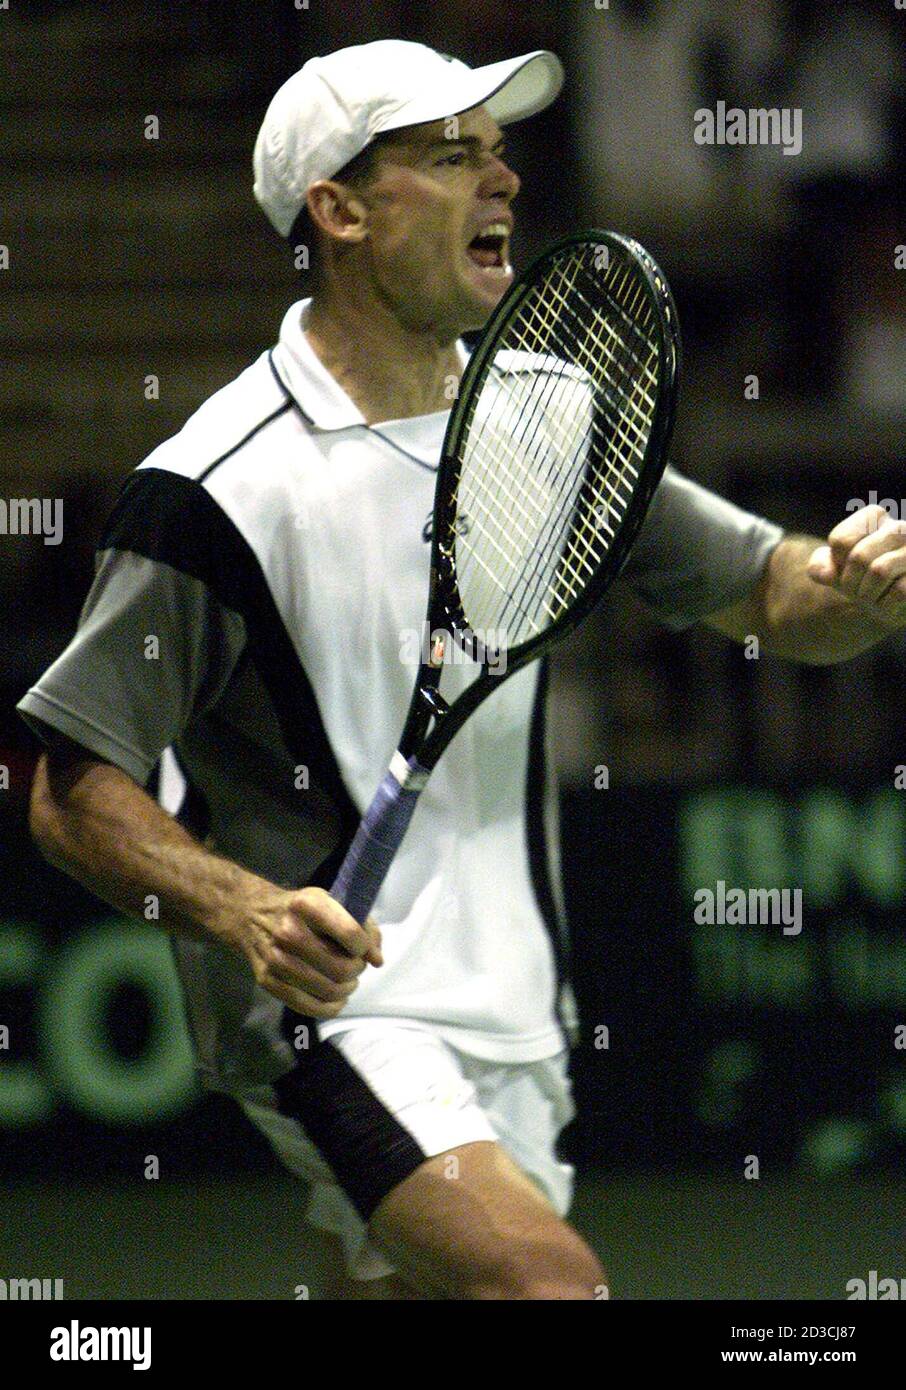 Zimbabwean tennis player Byron Black celebrates his win against Belarus's  Maxim Mirnyi during the final day of the Davis Cup tie in Harare April 7,  2002. Black won the match 3-1 (6-3